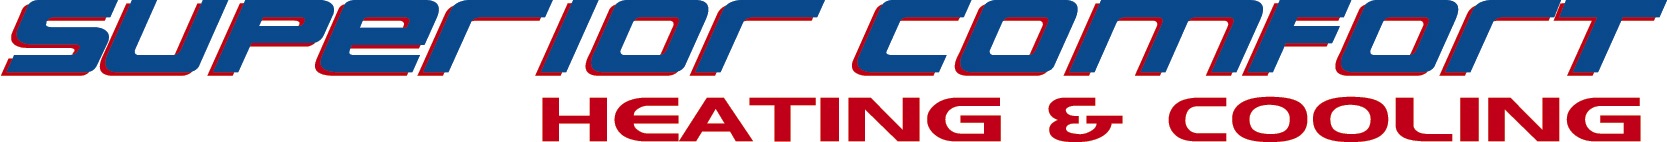 Superior Comfort Heating and Cooling's Logo